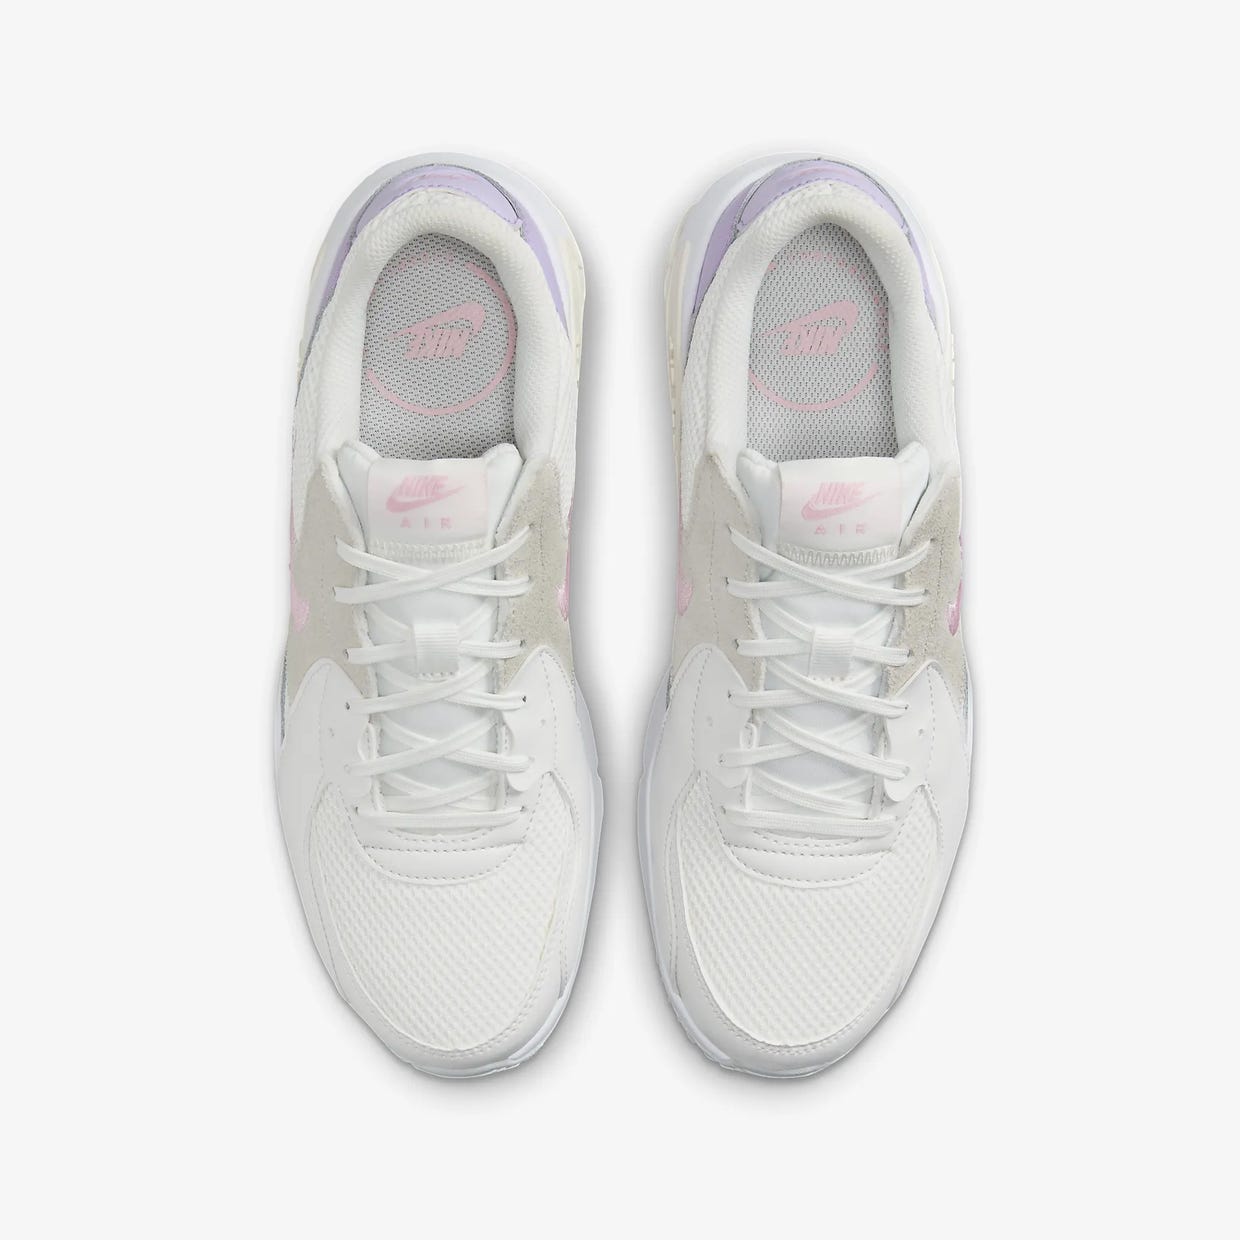 A pair of white sports shoes with pink and purple accents, featuring a mesh upper and cushioned soles.